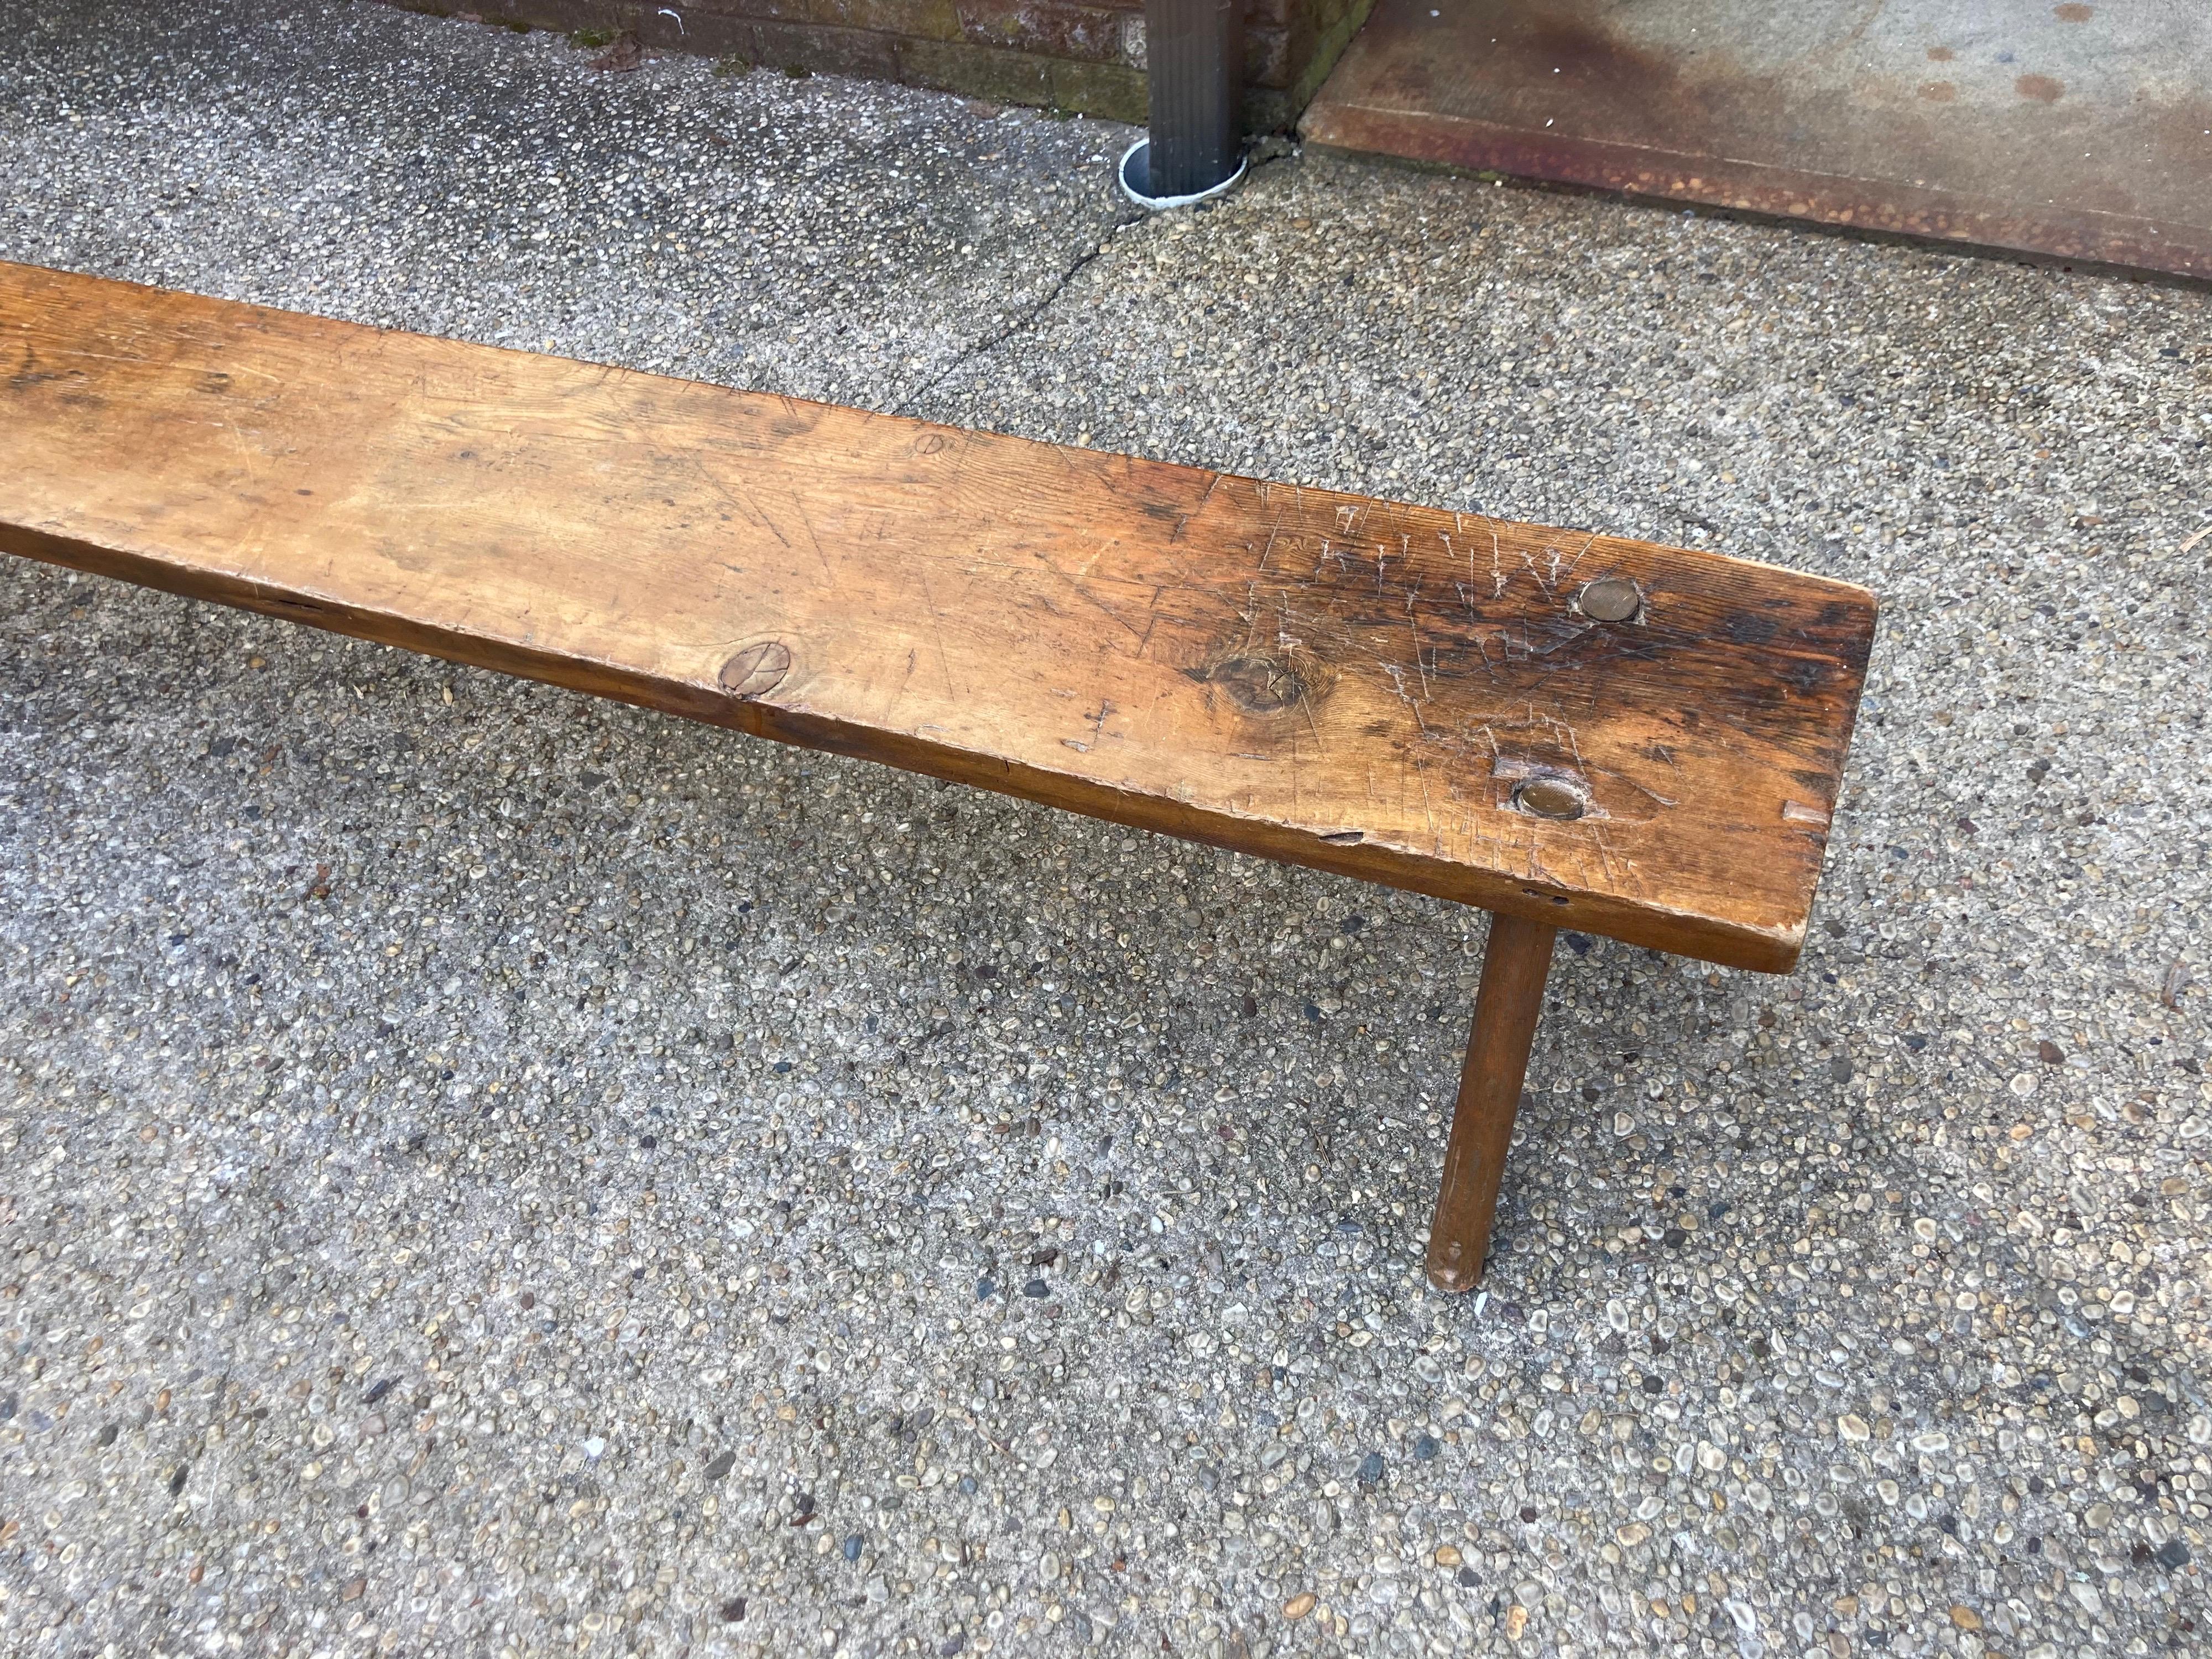 Hunt bench ..... long and bench with 4 legs, stretching 8.5' .... one-piece of wood.